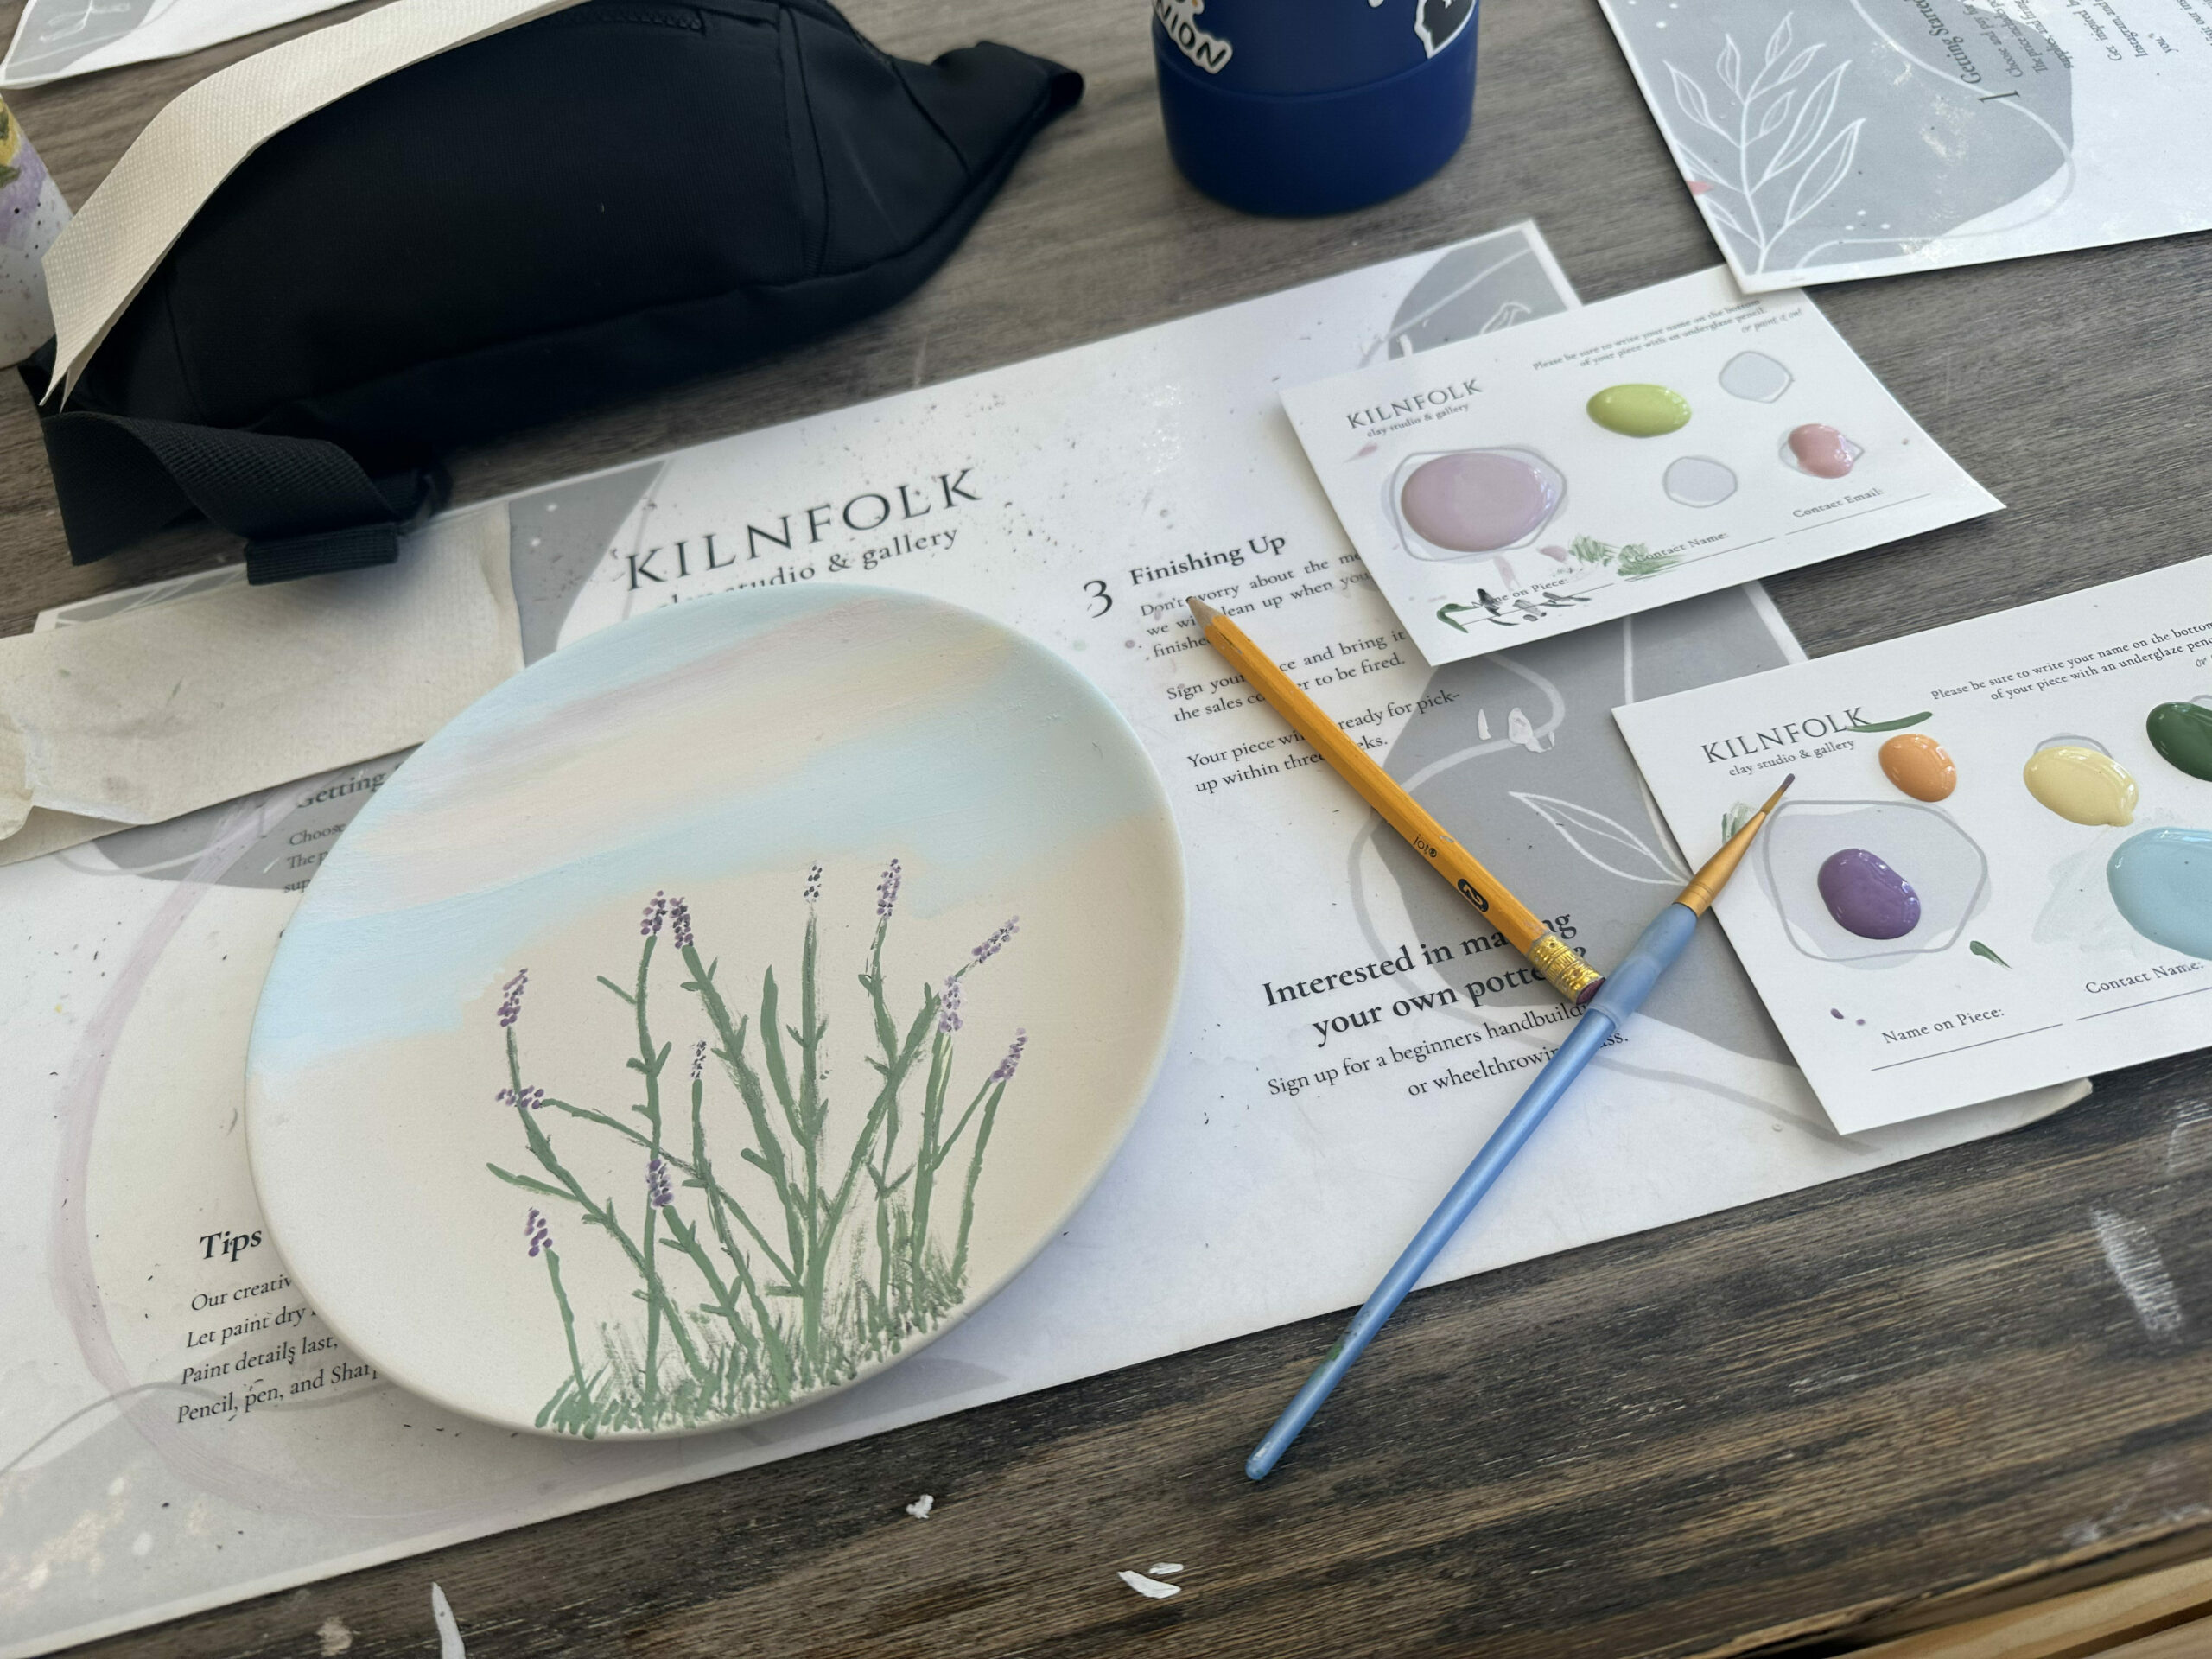 paint on paper and with a plate that has lavender painted on it at Kilnfolk pottery in Vancouver, WA